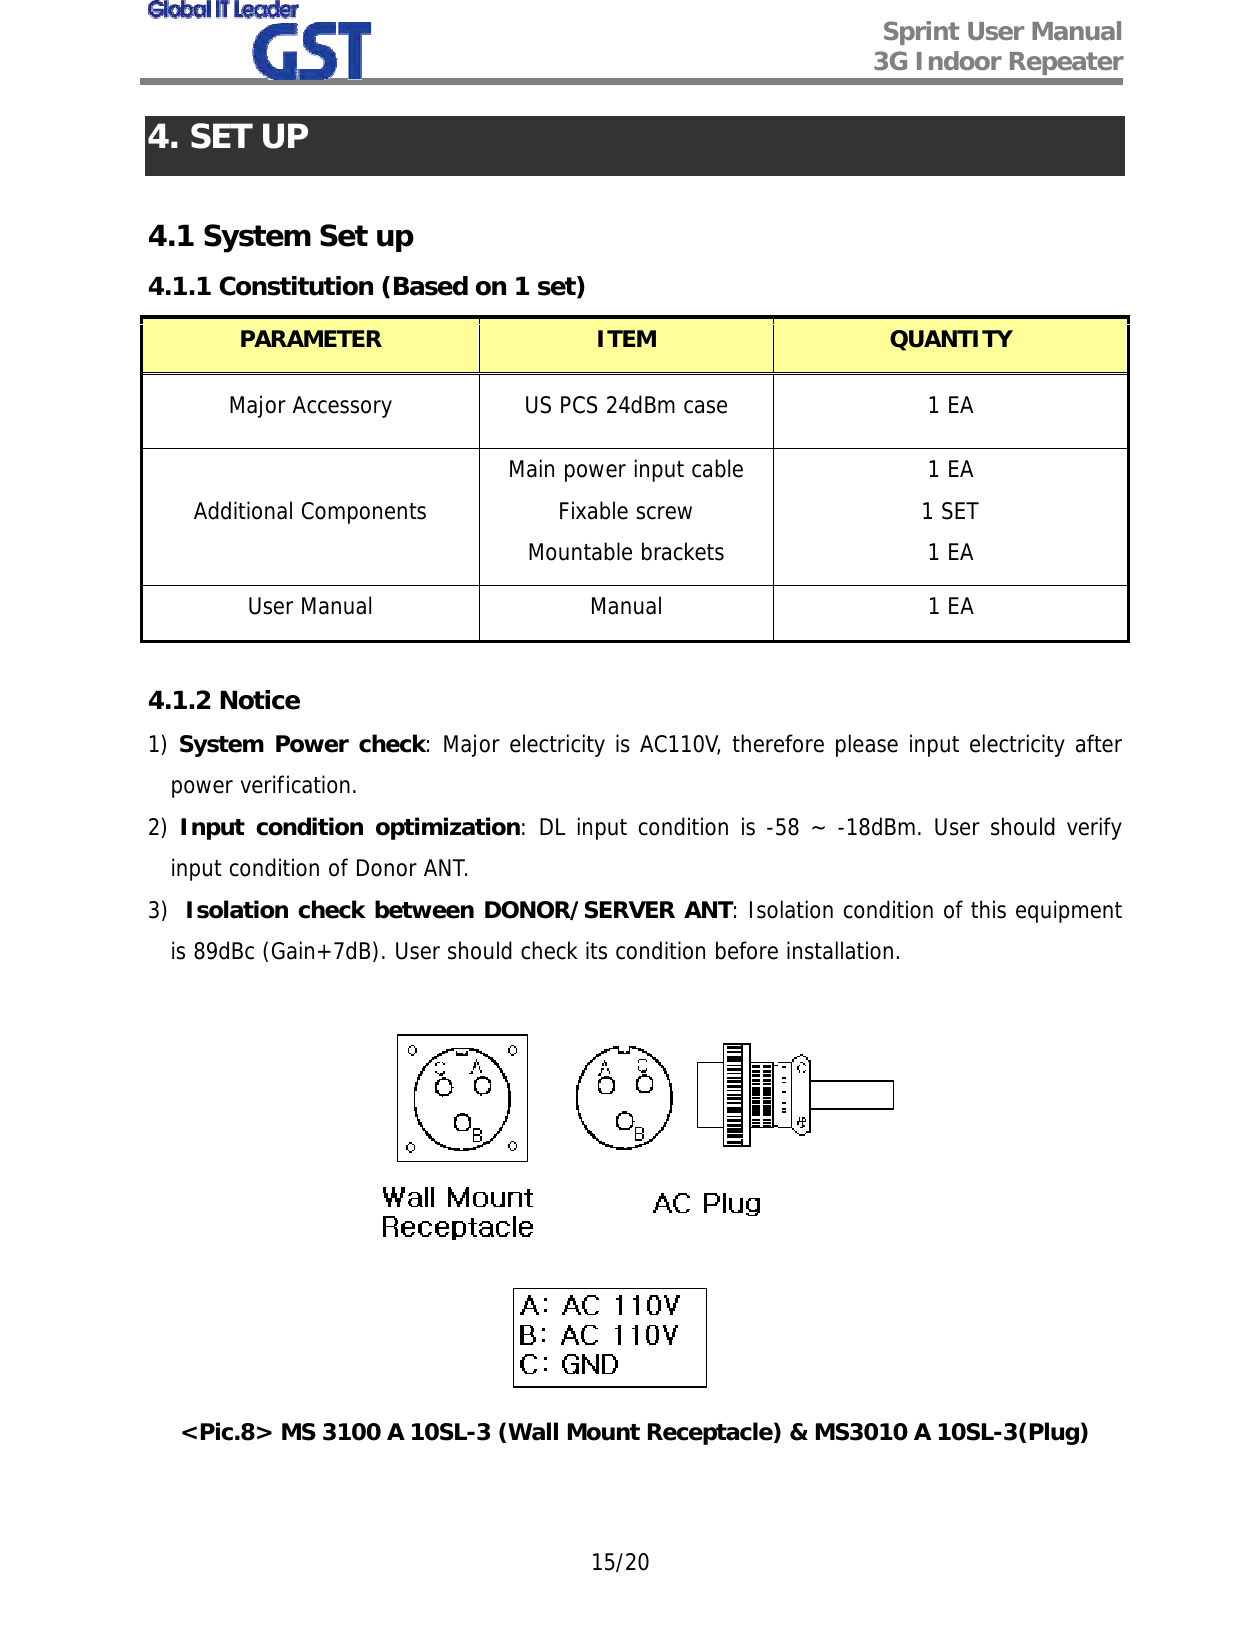  Sprint User Manual 3G Indoor Repeater   15/20 4. SET UP  4.1 System Set up 4.1.1 Constitution (Based on 1 set) PARAMETER  ITEM  QUANTITY Major Accessory  US PCS 24dBm case  1 EA Additional Components Main power input cable Fixable screw Mountable brackets 1 EA 1 SET 1 EA User Manual  Manual  1 EA  4.1.2 Notice 1) System Power check: Major electricity is AC110V, therefore please input electricity after power verification. 2) Input condition optimization: DL input condition is -58 ~ -18dBm. User should verify input condition of Donor ANT. 3)  Isolation check between DONOR/SERVER ANT: Isolation condition of this equipment is 89dBc (Gain+7dB). User should check its condition before installation.   &lt;Pic.8&gt; MS 3100 A 10SL-3 (Wall Mount Receptacle) &amp; MS3010 A 10SL-3(Plug)   